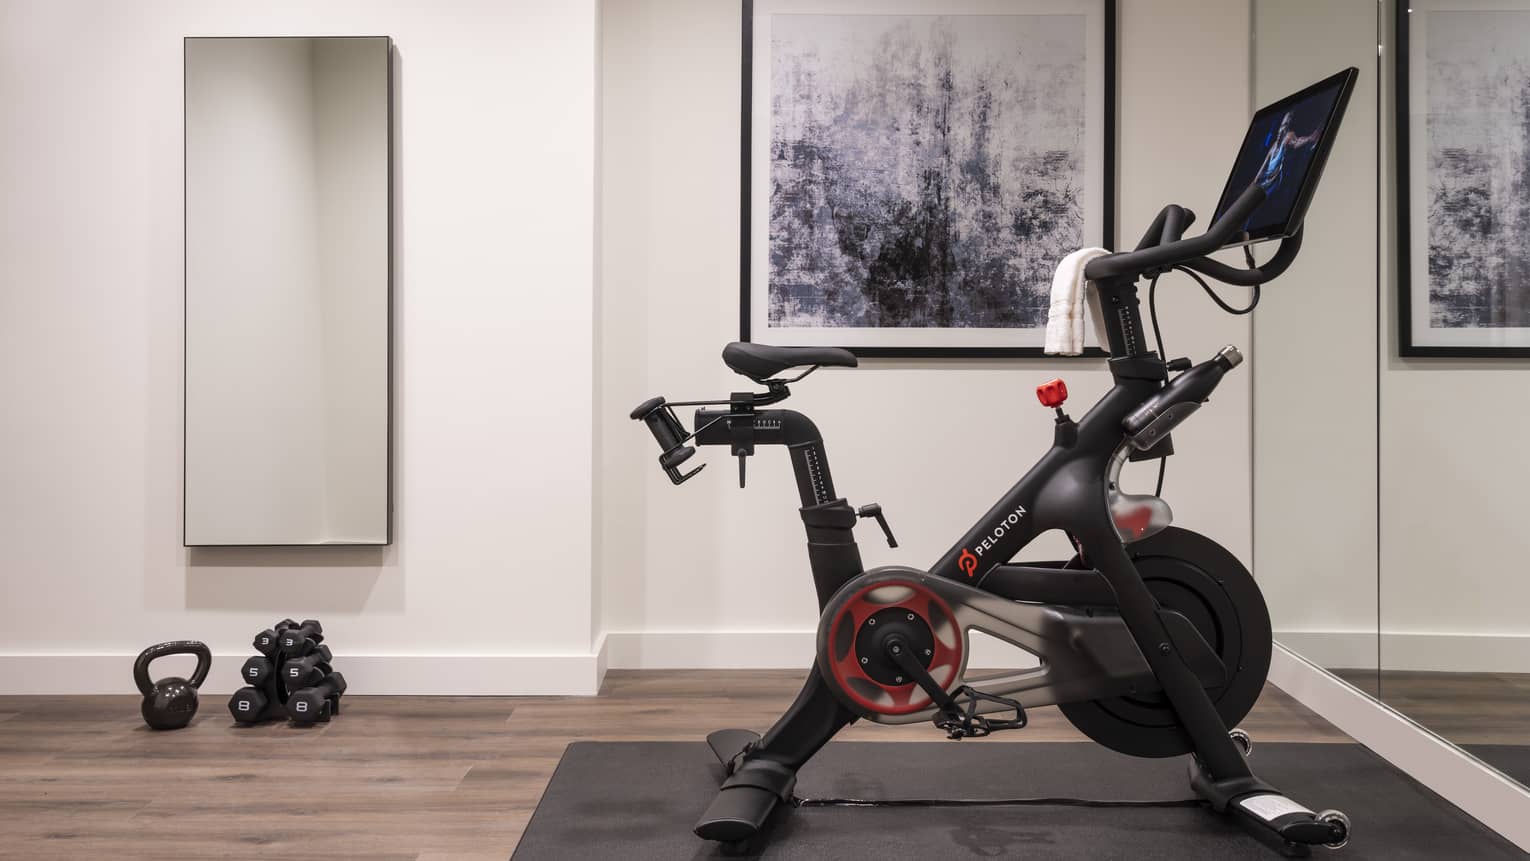 An exercise area with a stationary bike, a kettle ball and various dumbbells.